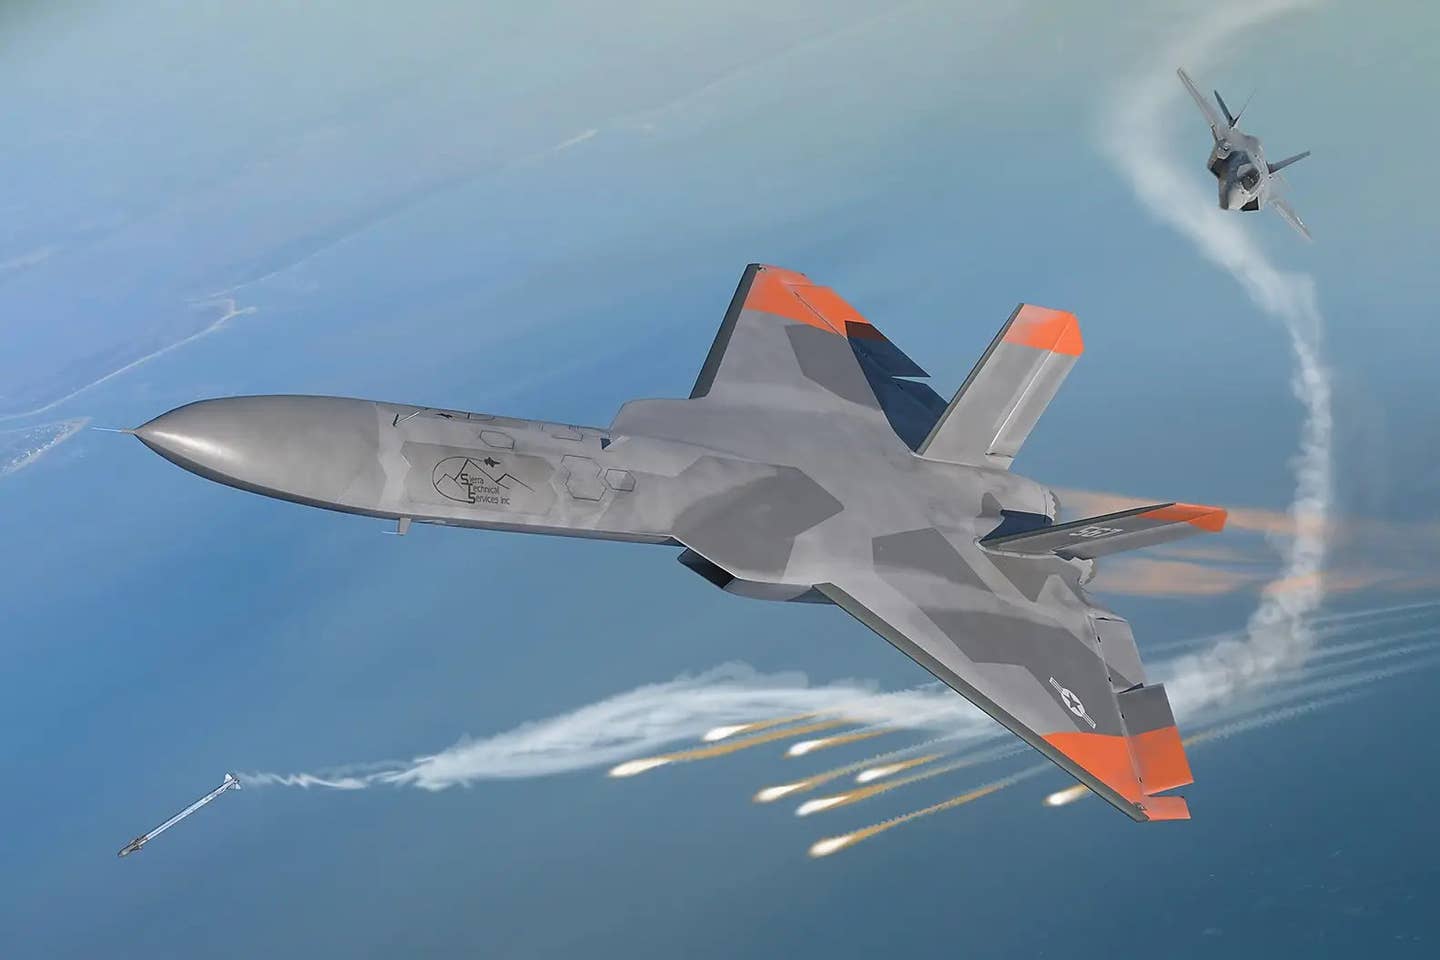 A rendering of a 5GAT drone dueling with an F-35 Joint Strike Fighter. The drone appears to have released countermeasure flares to help evade an AIM-9X Sidewinder missile fired by the F-35. <em>Sierra Technical Services</em>